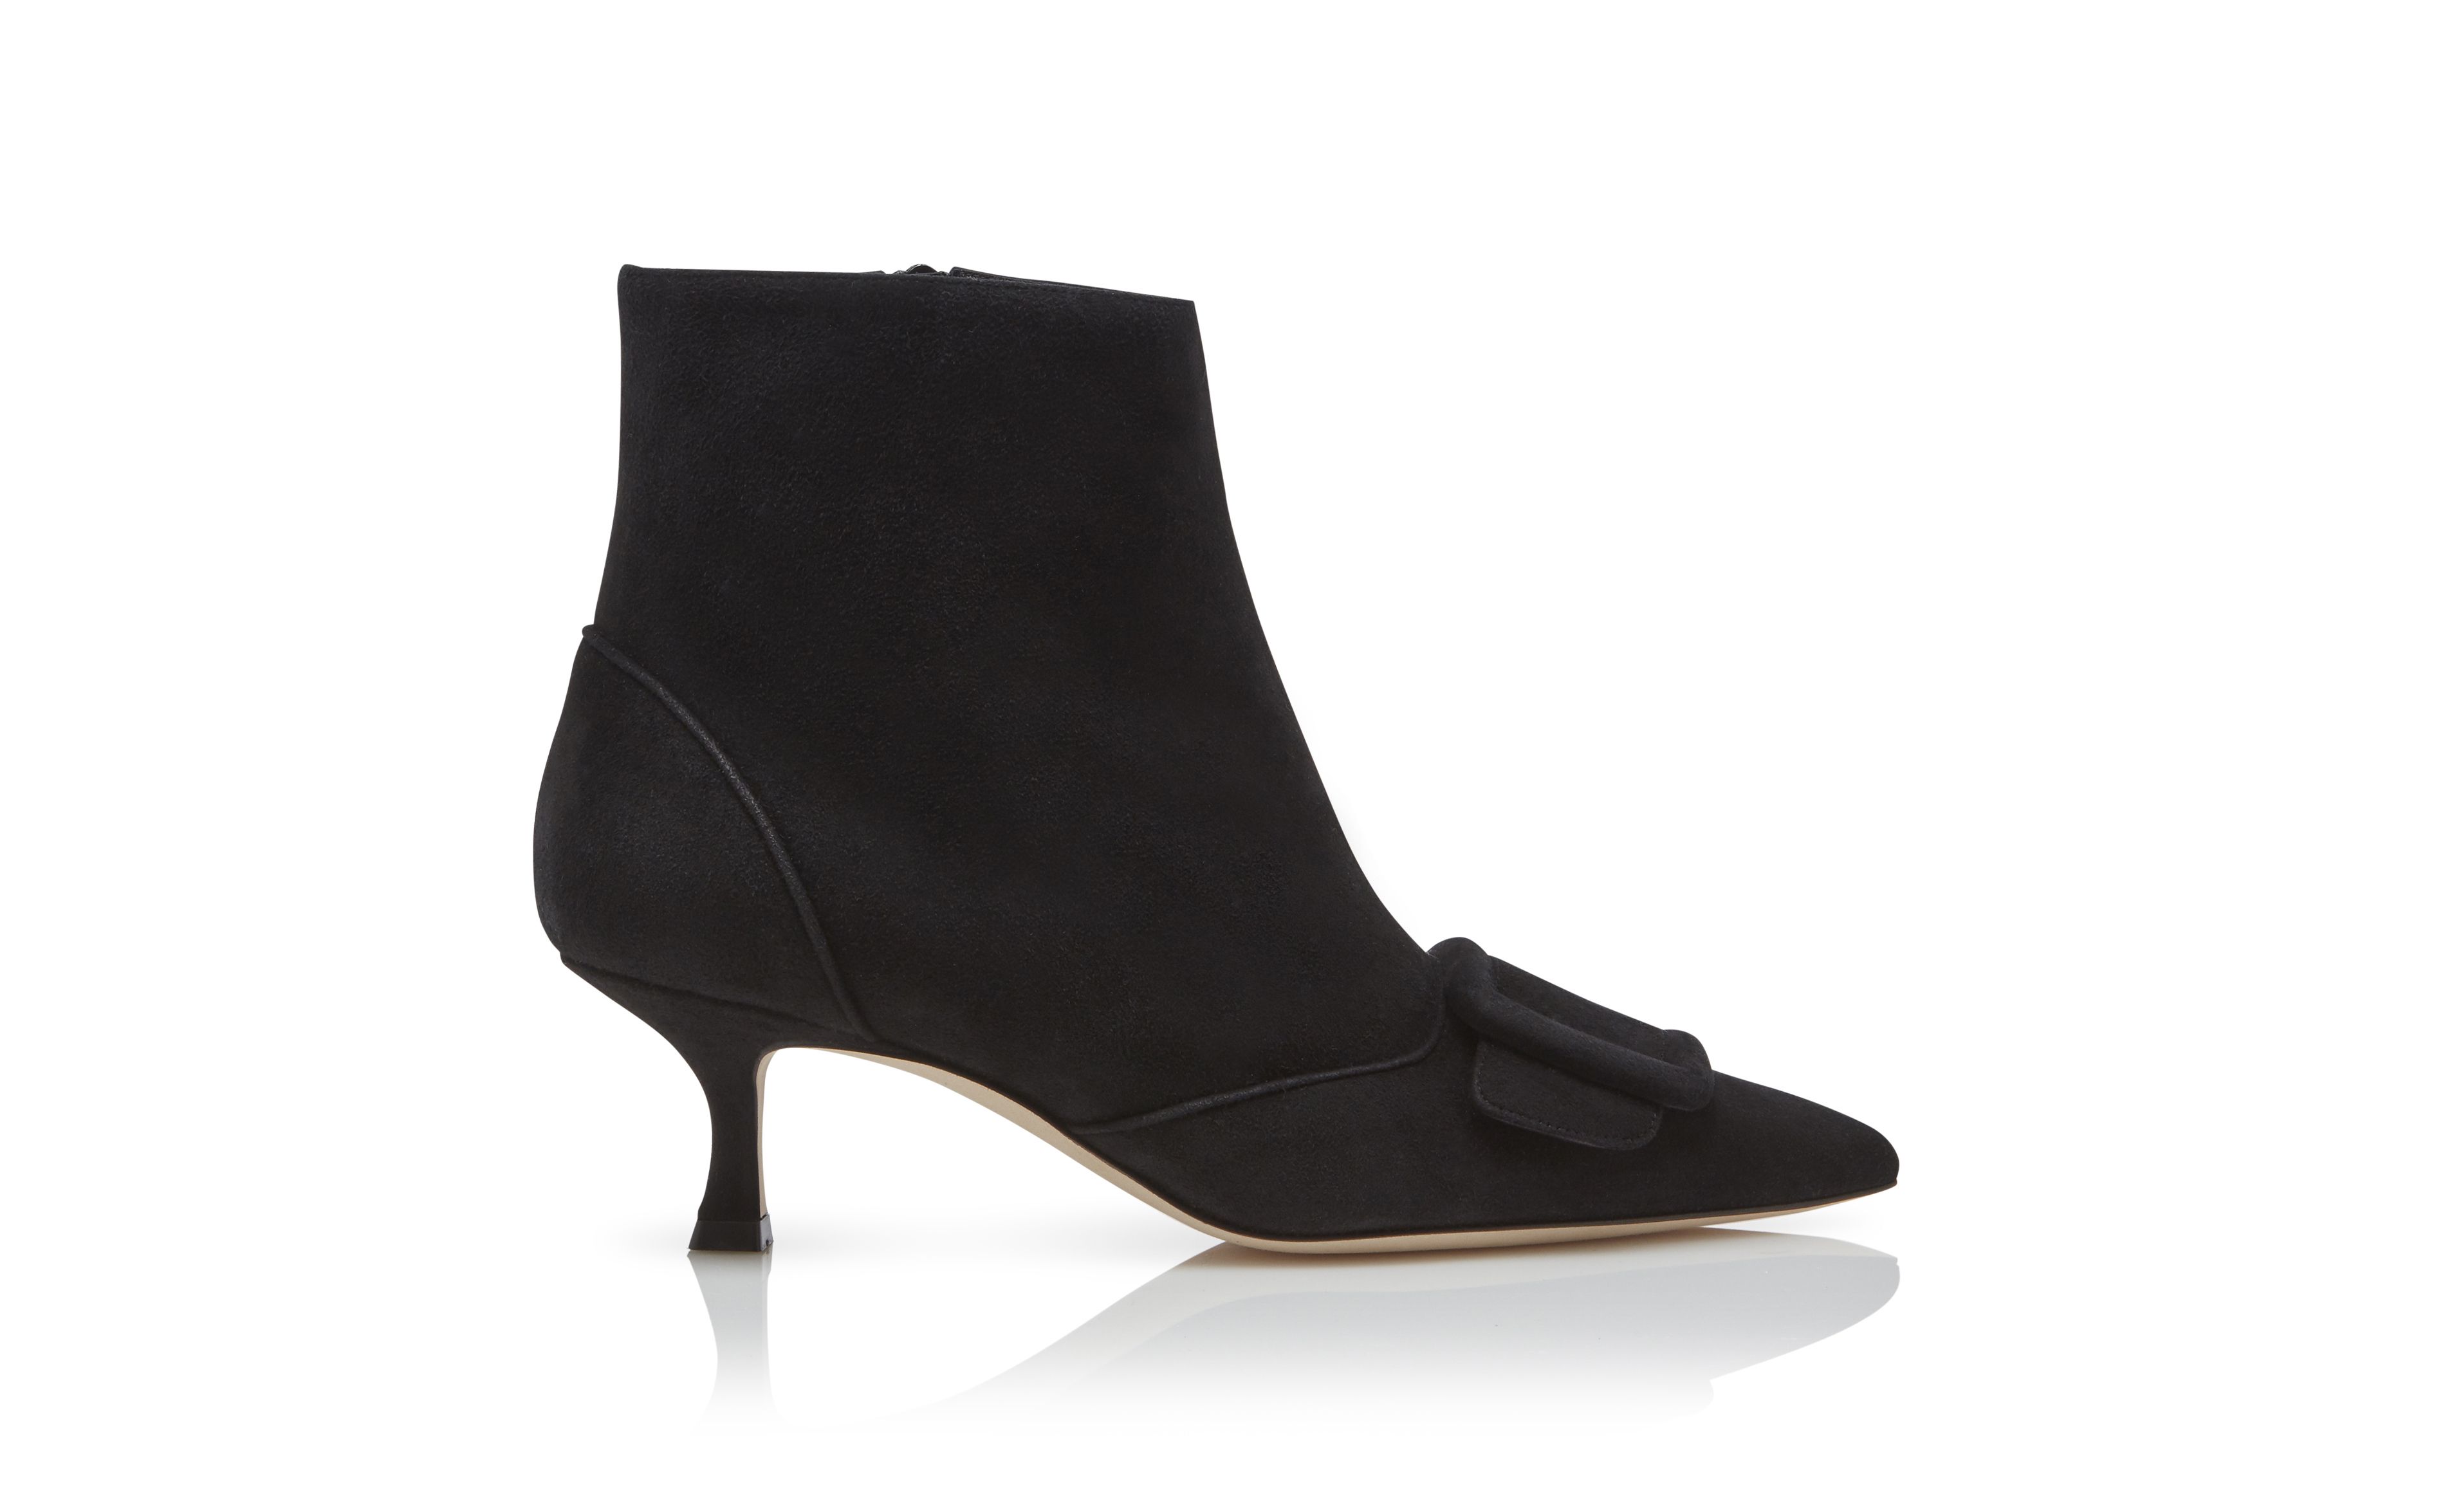 BAYLOW | Black Suede Buckle Detail Ankle Boots | Manolo Blahnik